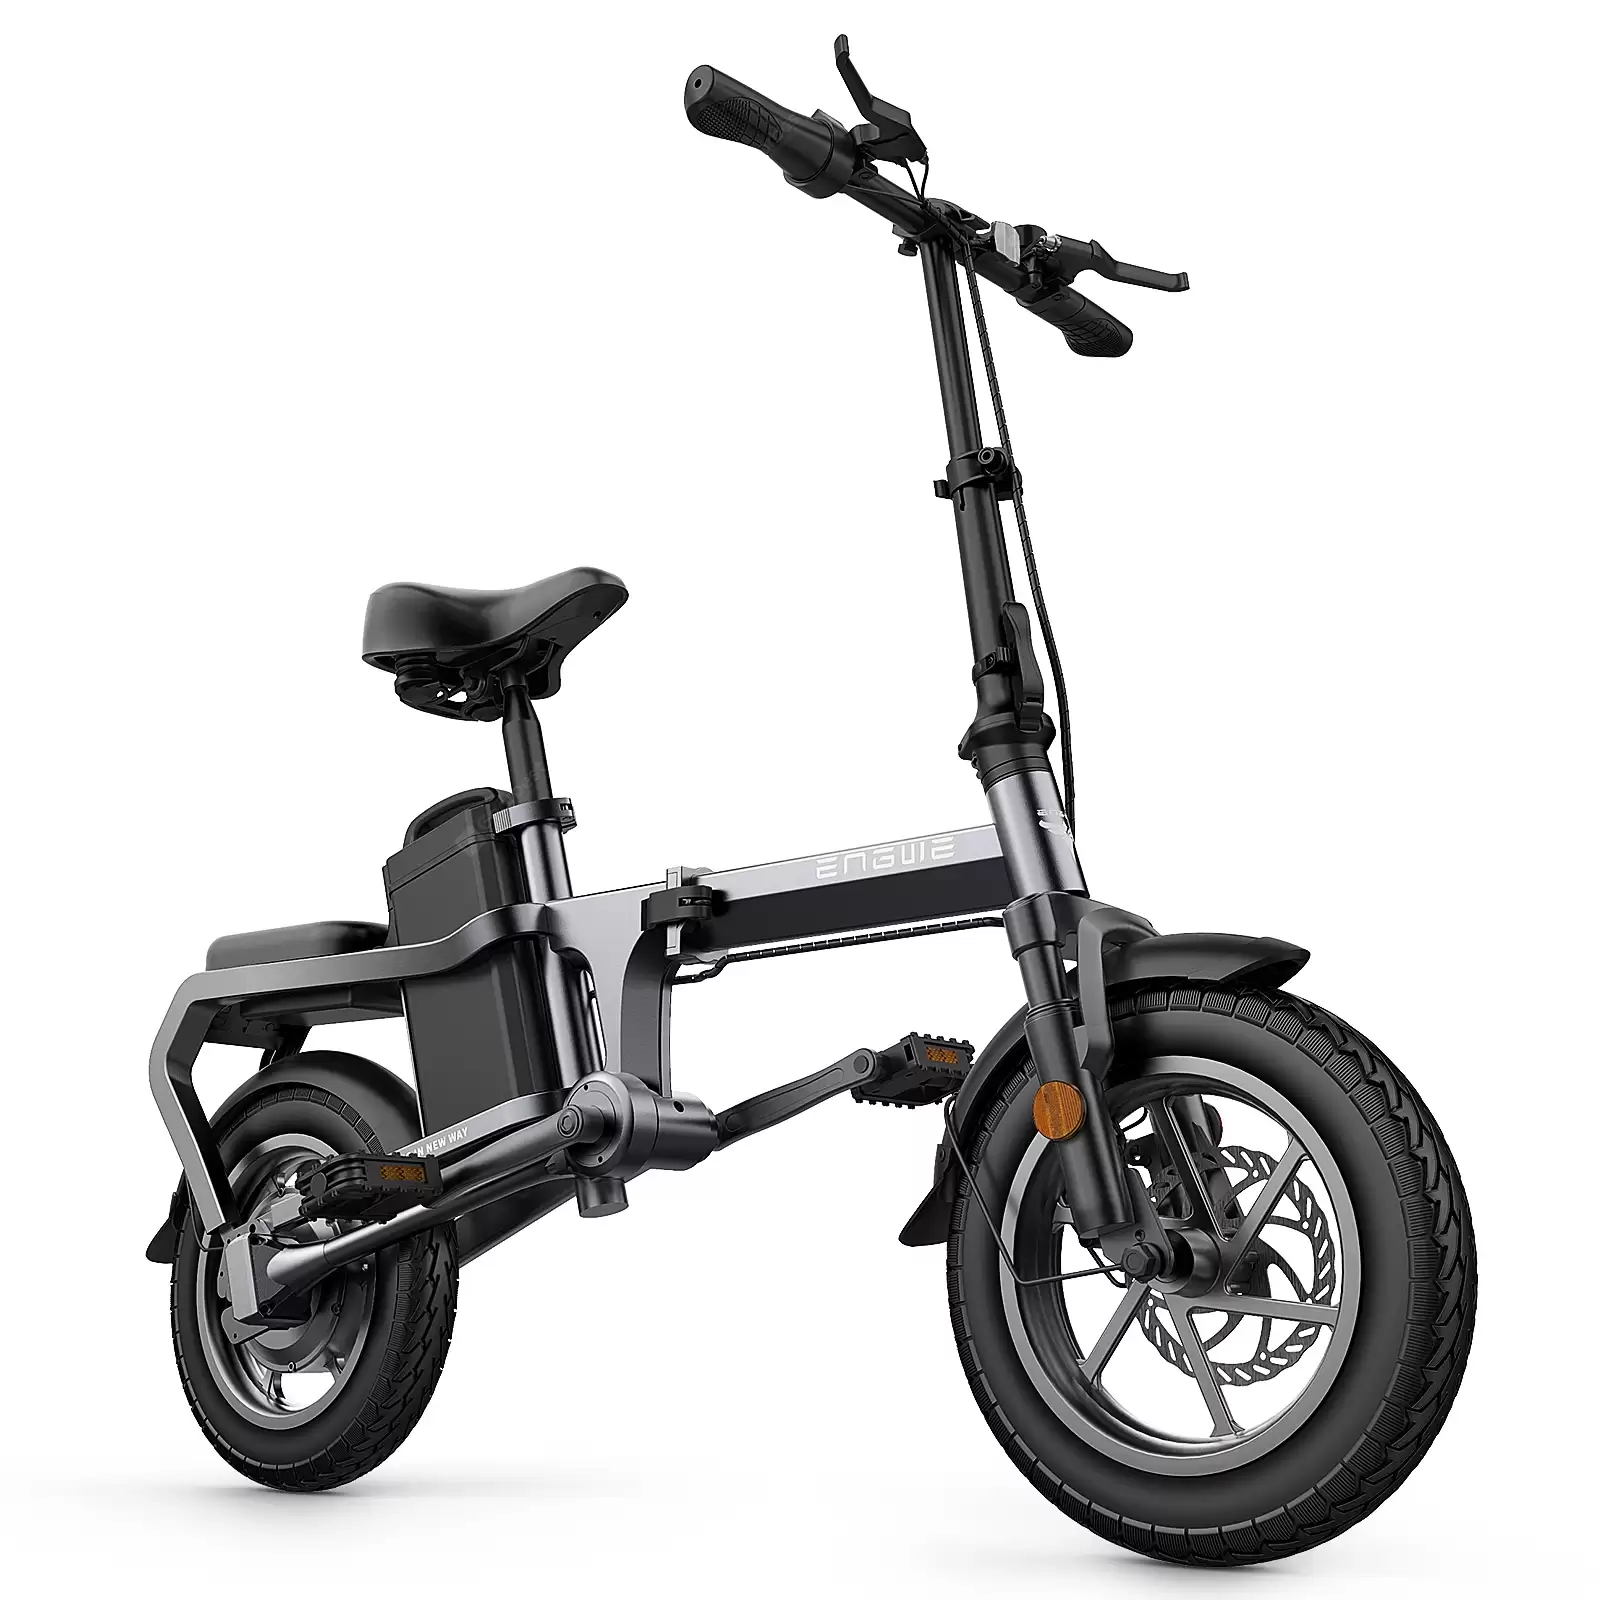 Order In Just $699.00 Engwe X5s Chainless Folding Electric Bike With Removable Battery At Gearbest With This Coupon